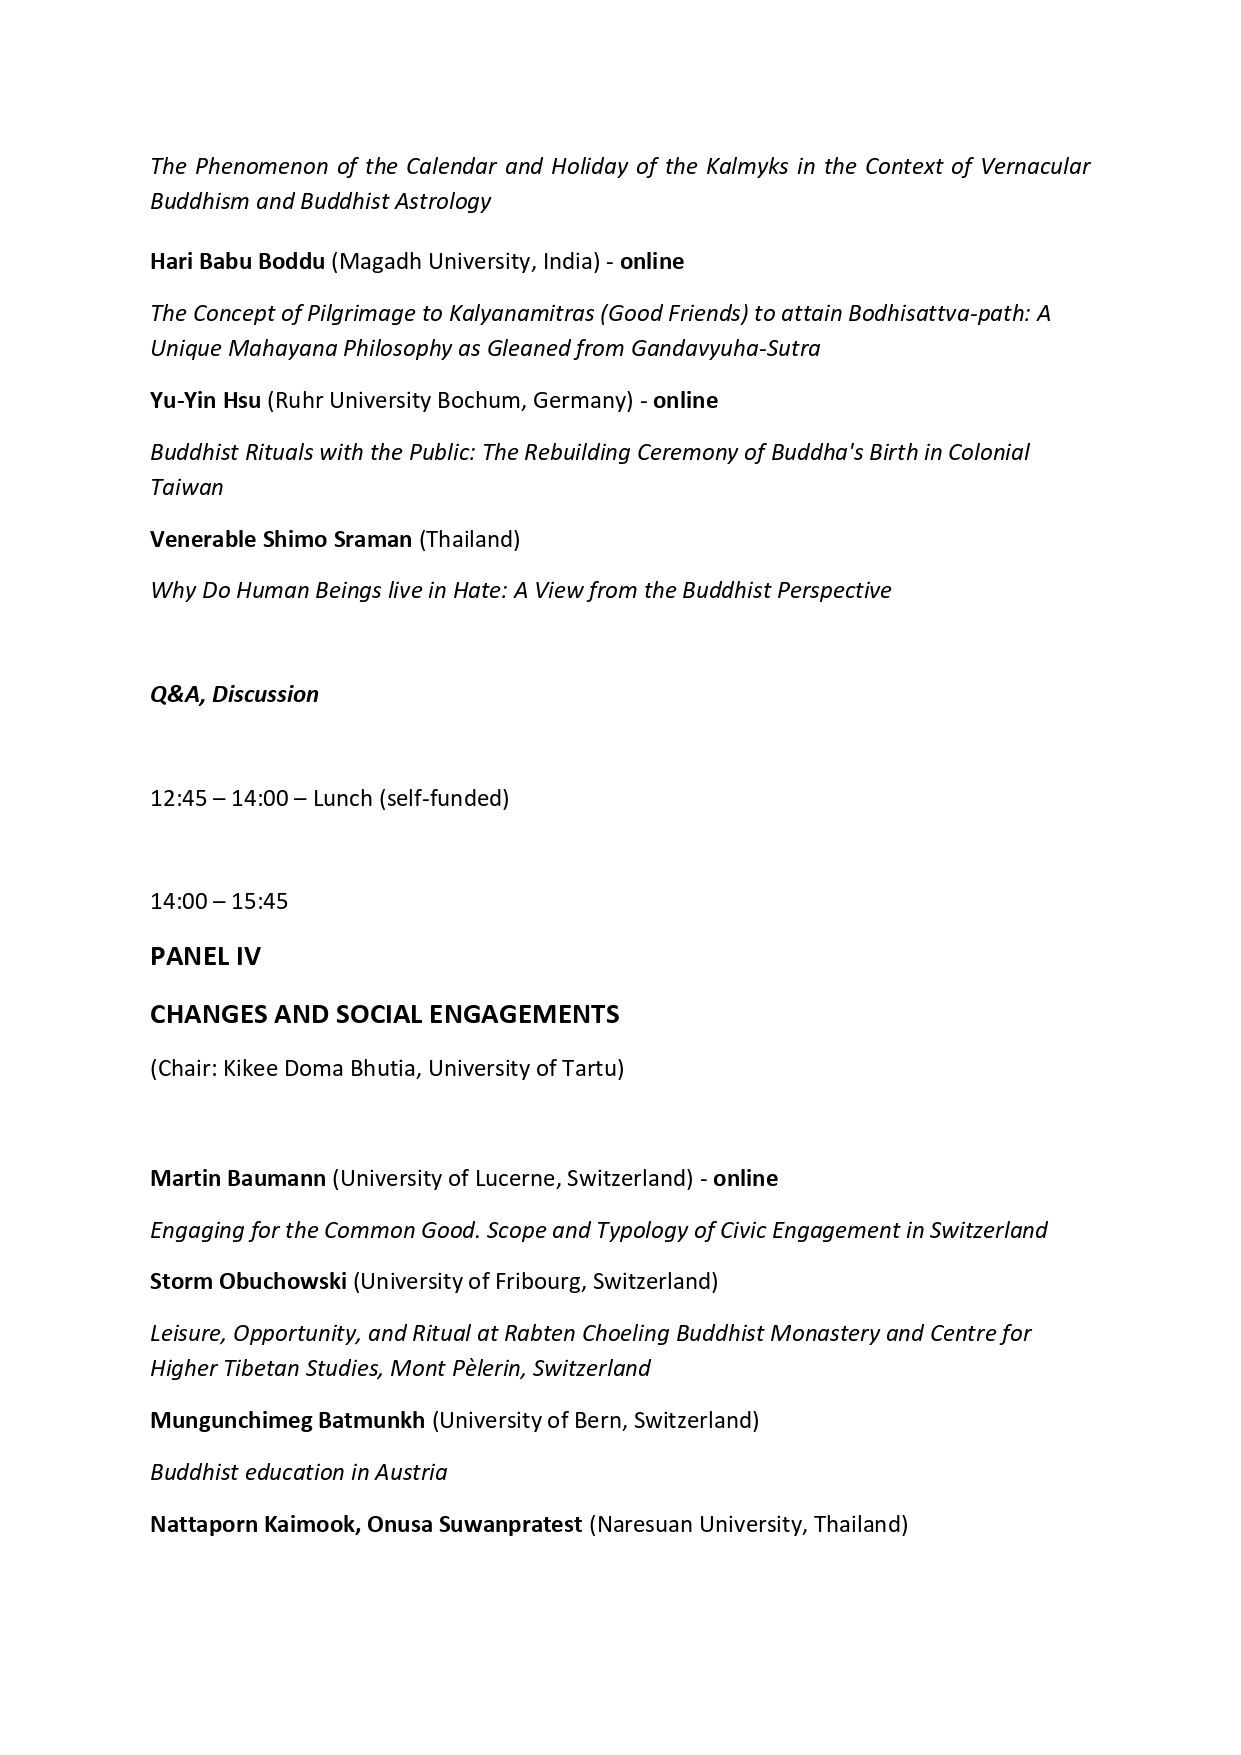 Conference program (2) (1)_page-0007